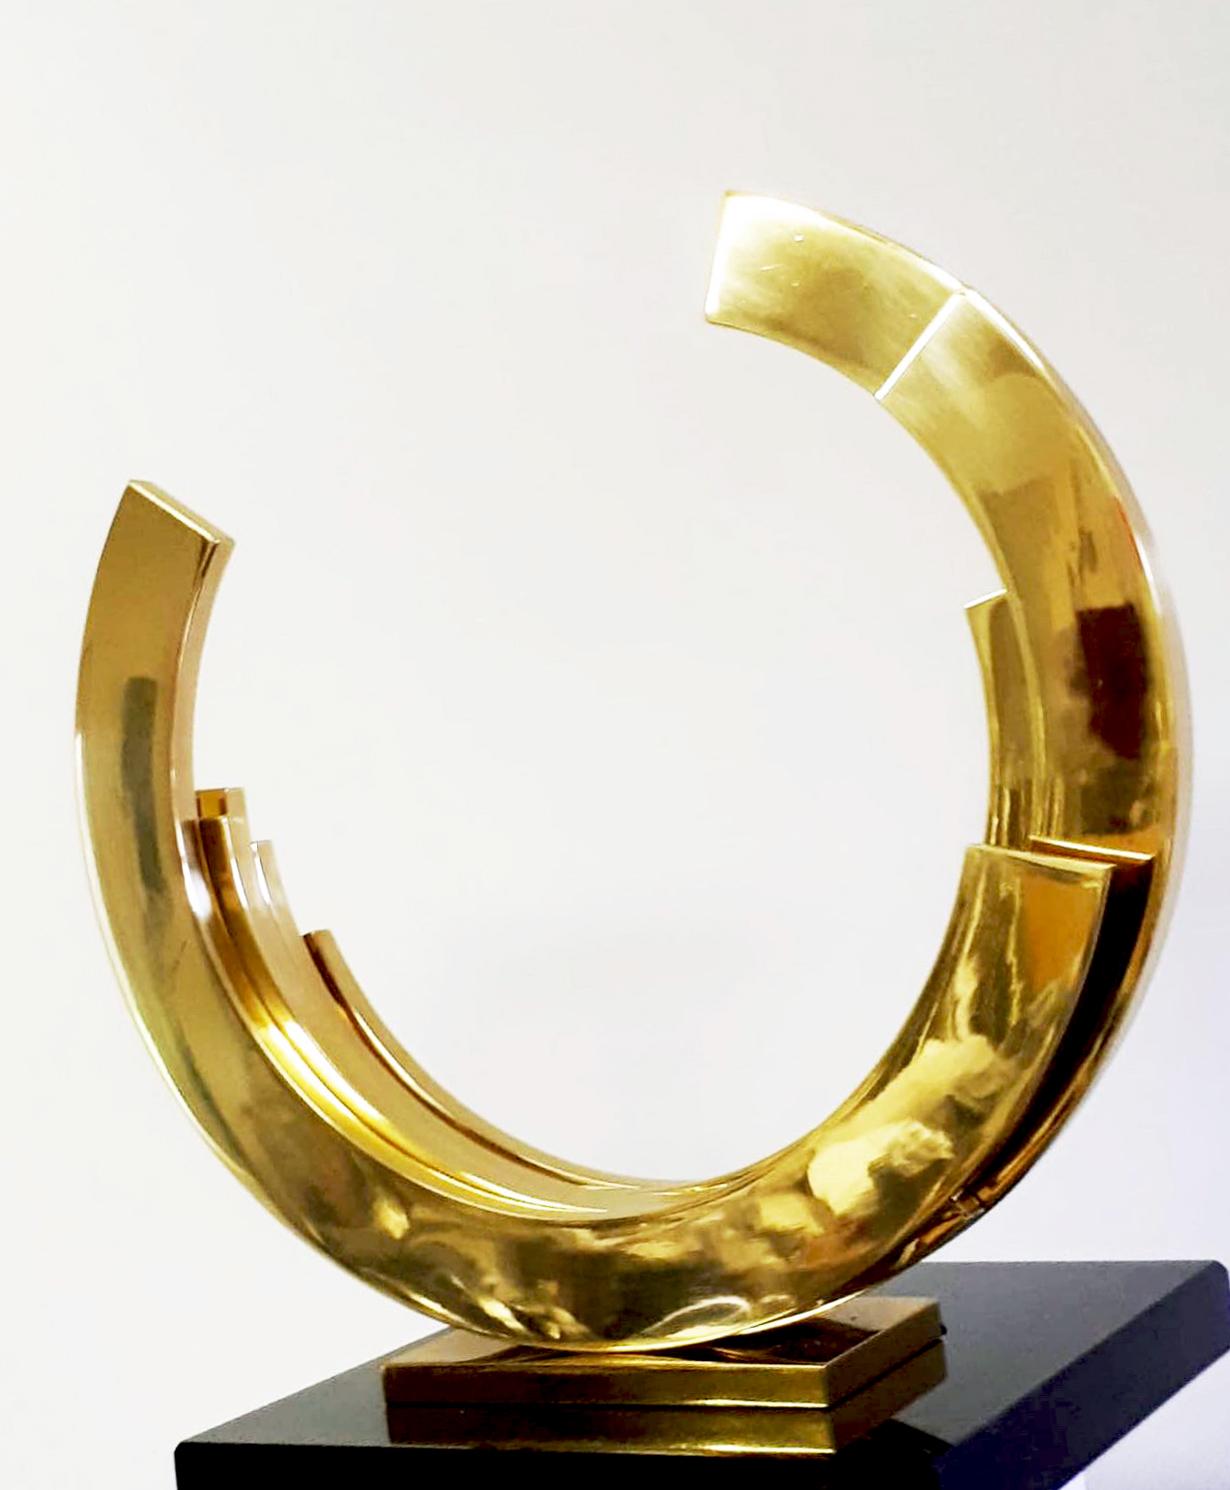 Beautiful golden circular sphere by artist Kuno Vollet., This contemporary abstract sculpture is an elegant piece. The brass has been coated to help reduce stains on the precious metal. 
The size of the sculpture is 36 x 36 x 8 cm. 

The gold makes